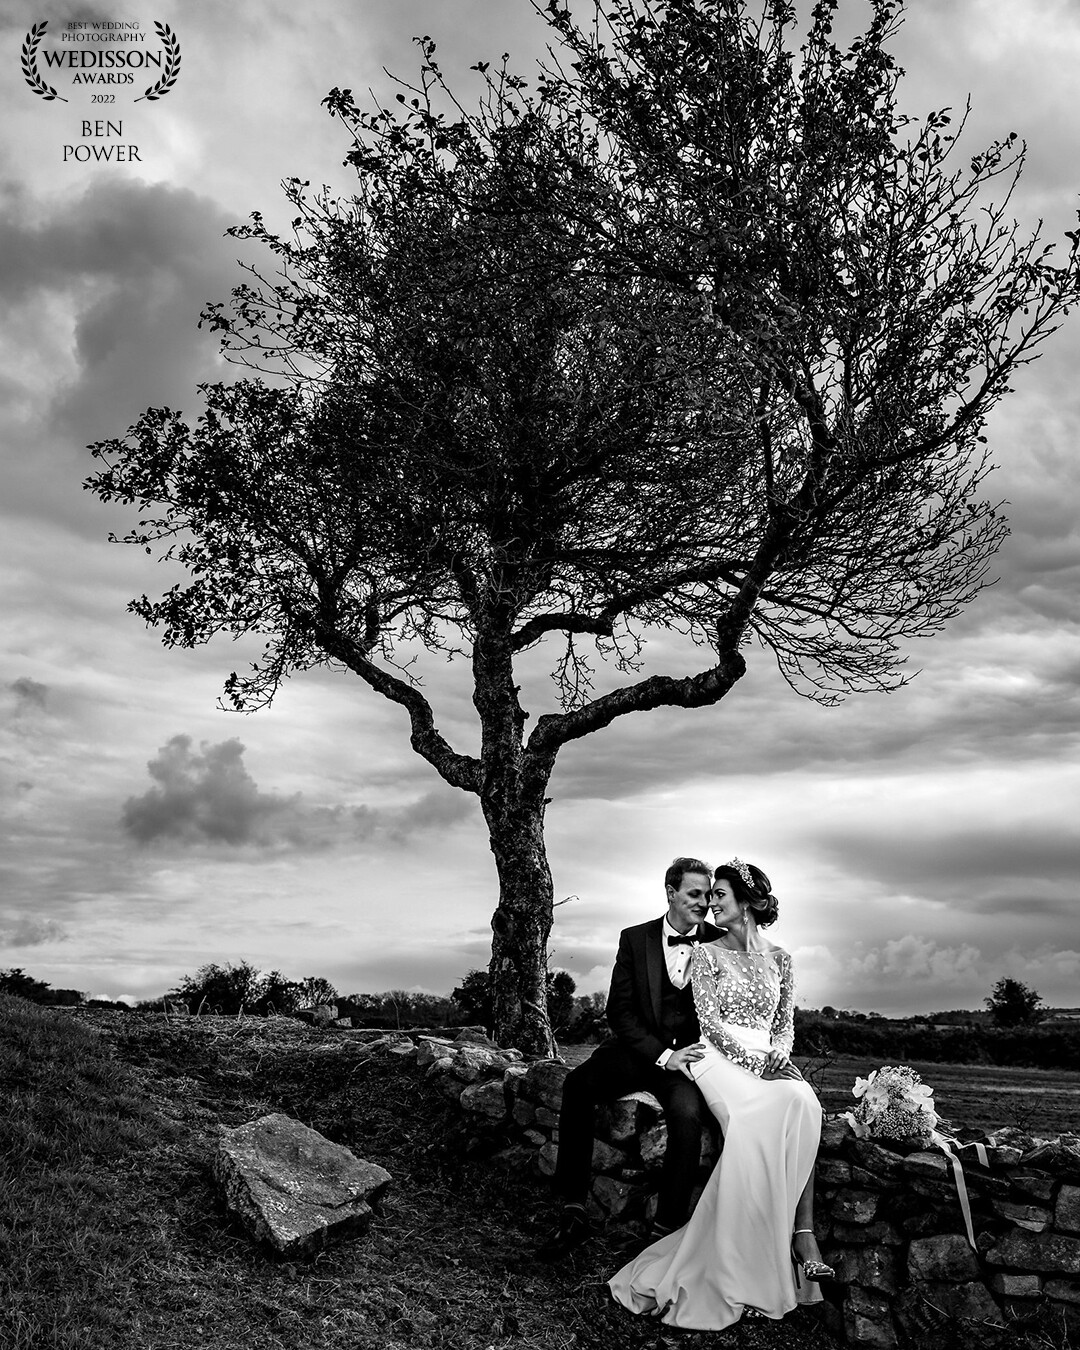 Louise & James sharing a quiet moment under a hawthorn tree.In Celtic mythology it is one of the most sacred trees and symbolises love and protection. ..